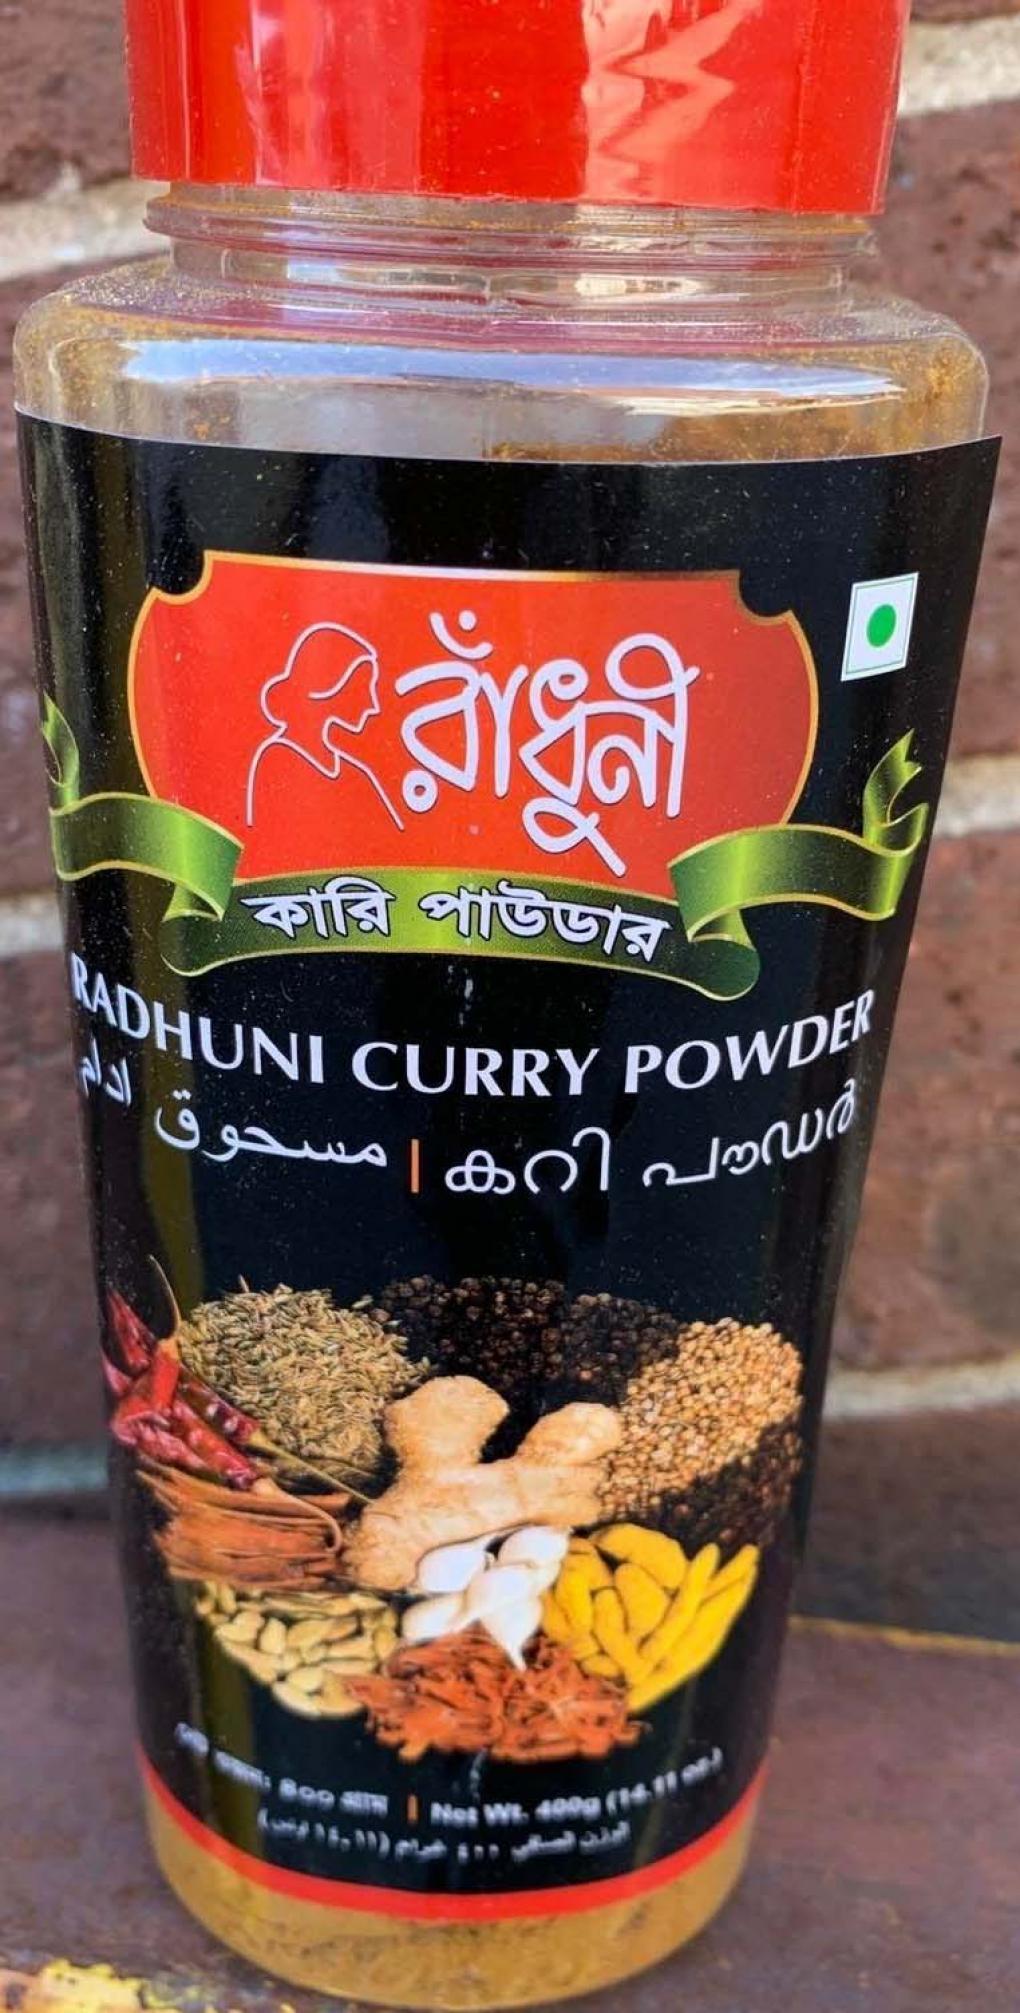 New Hoque and Sons, Inc. recalled Radhuni curry powder due to Salmonella